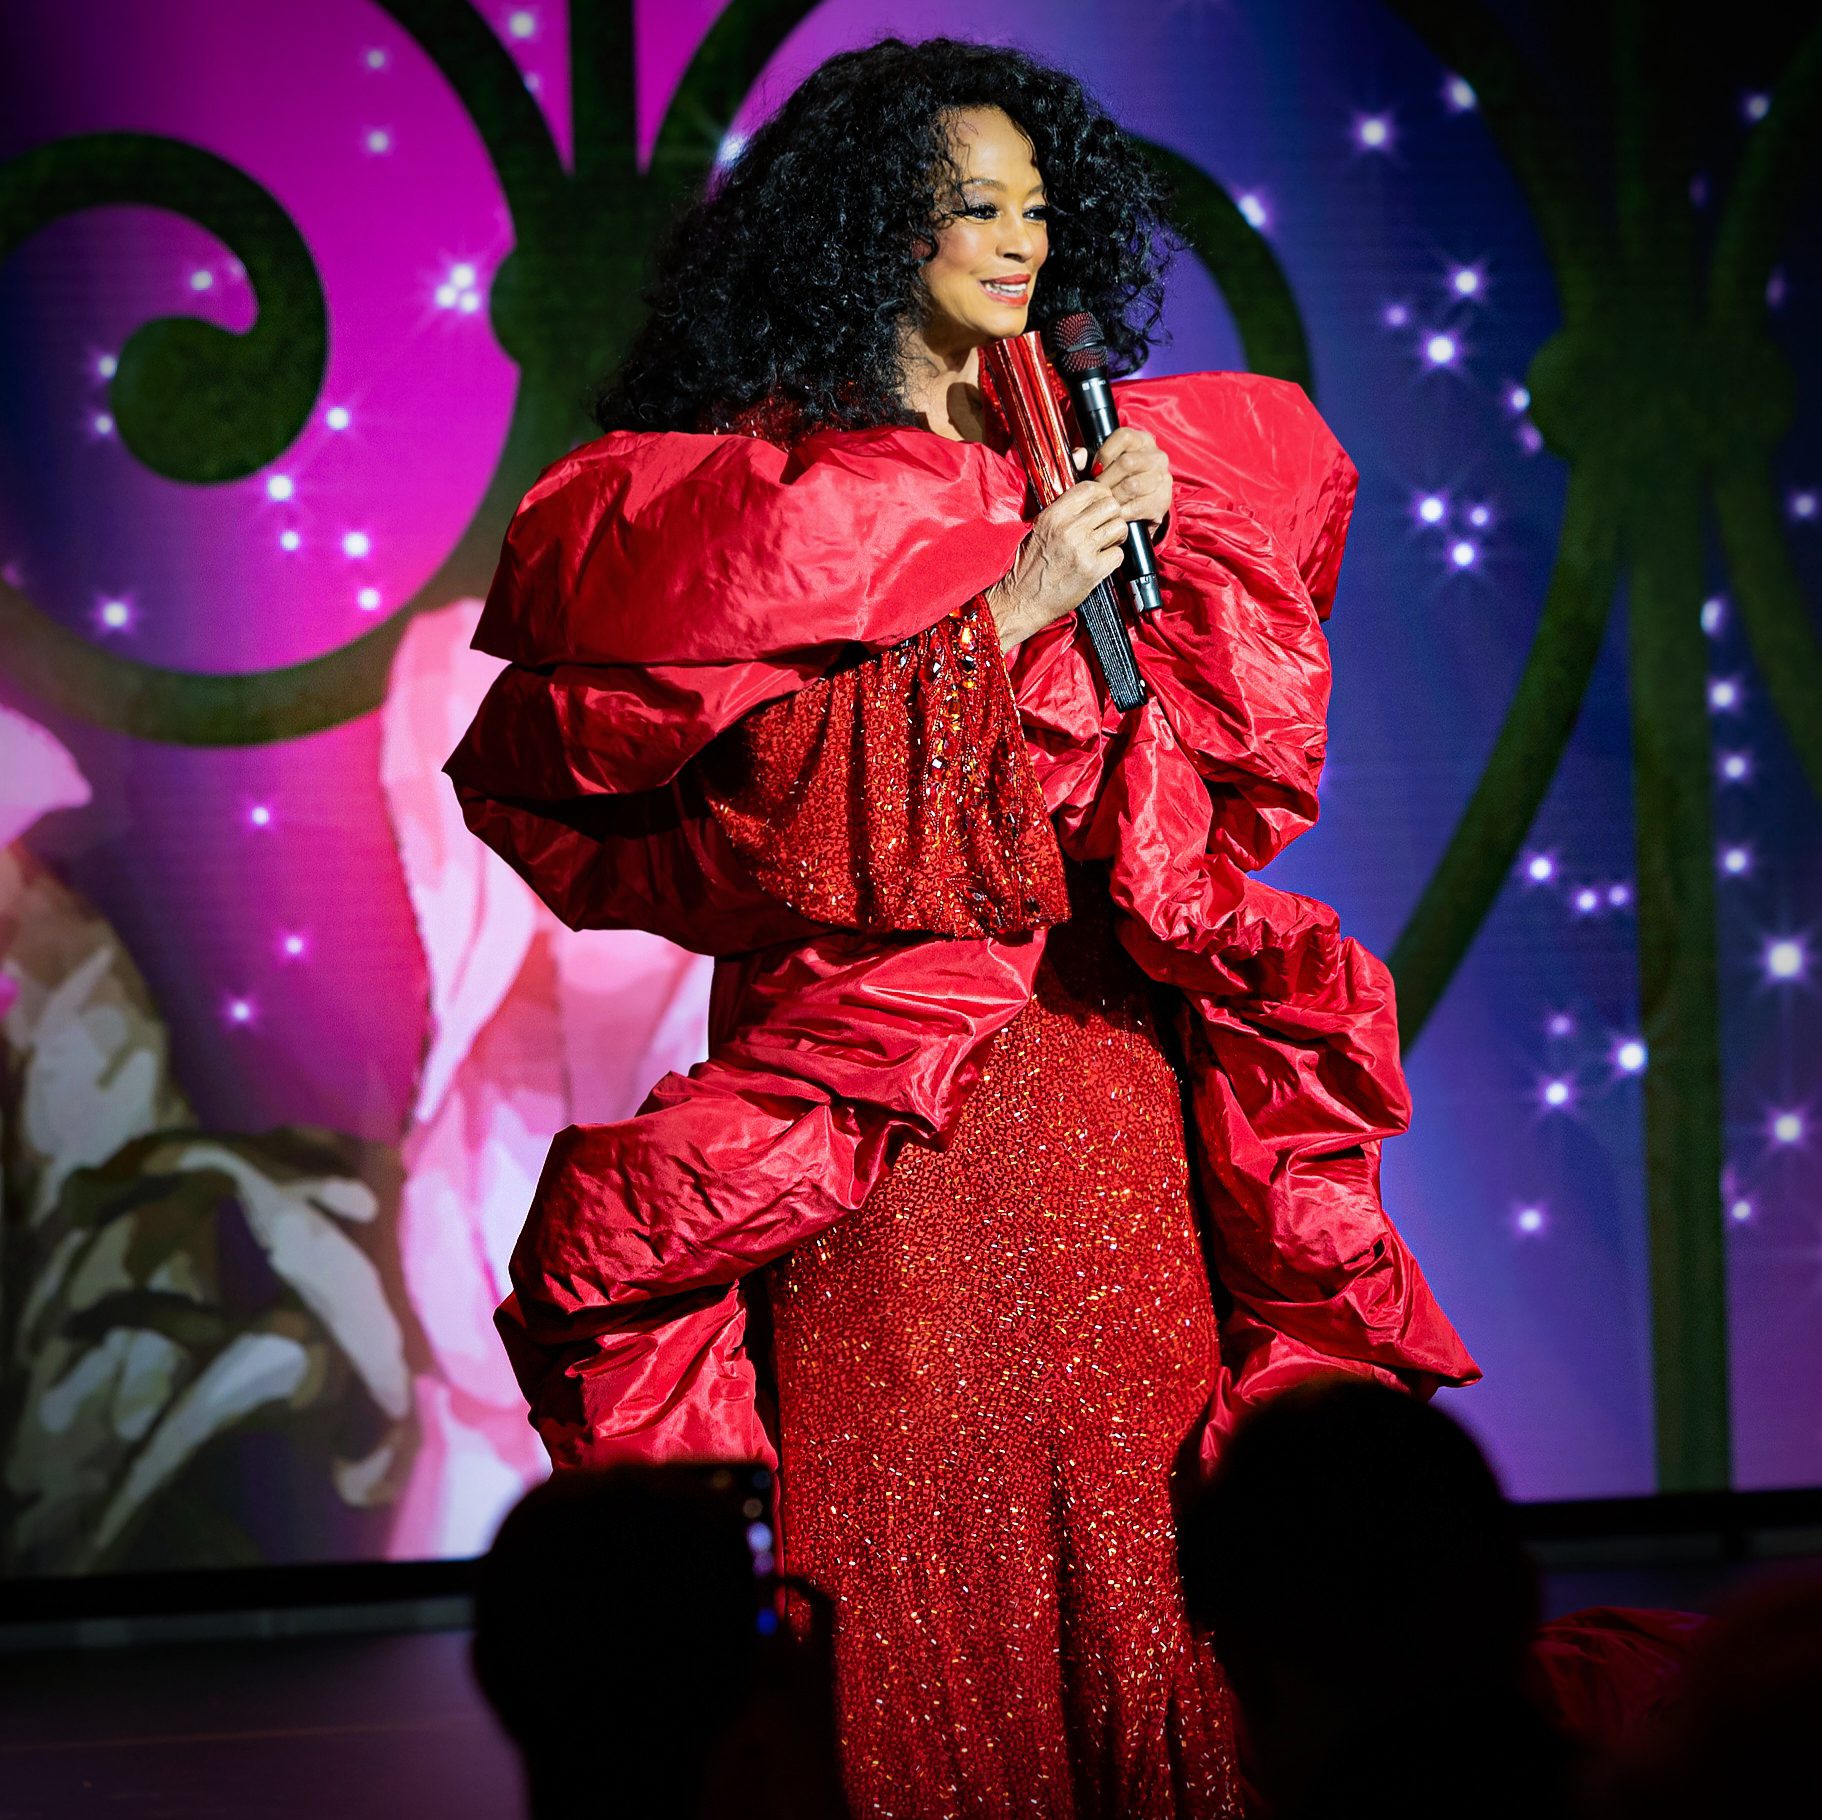 Diana Ross attended the Breast Cancer Research Foundation gala in NYC via 360 MAGAZINE.